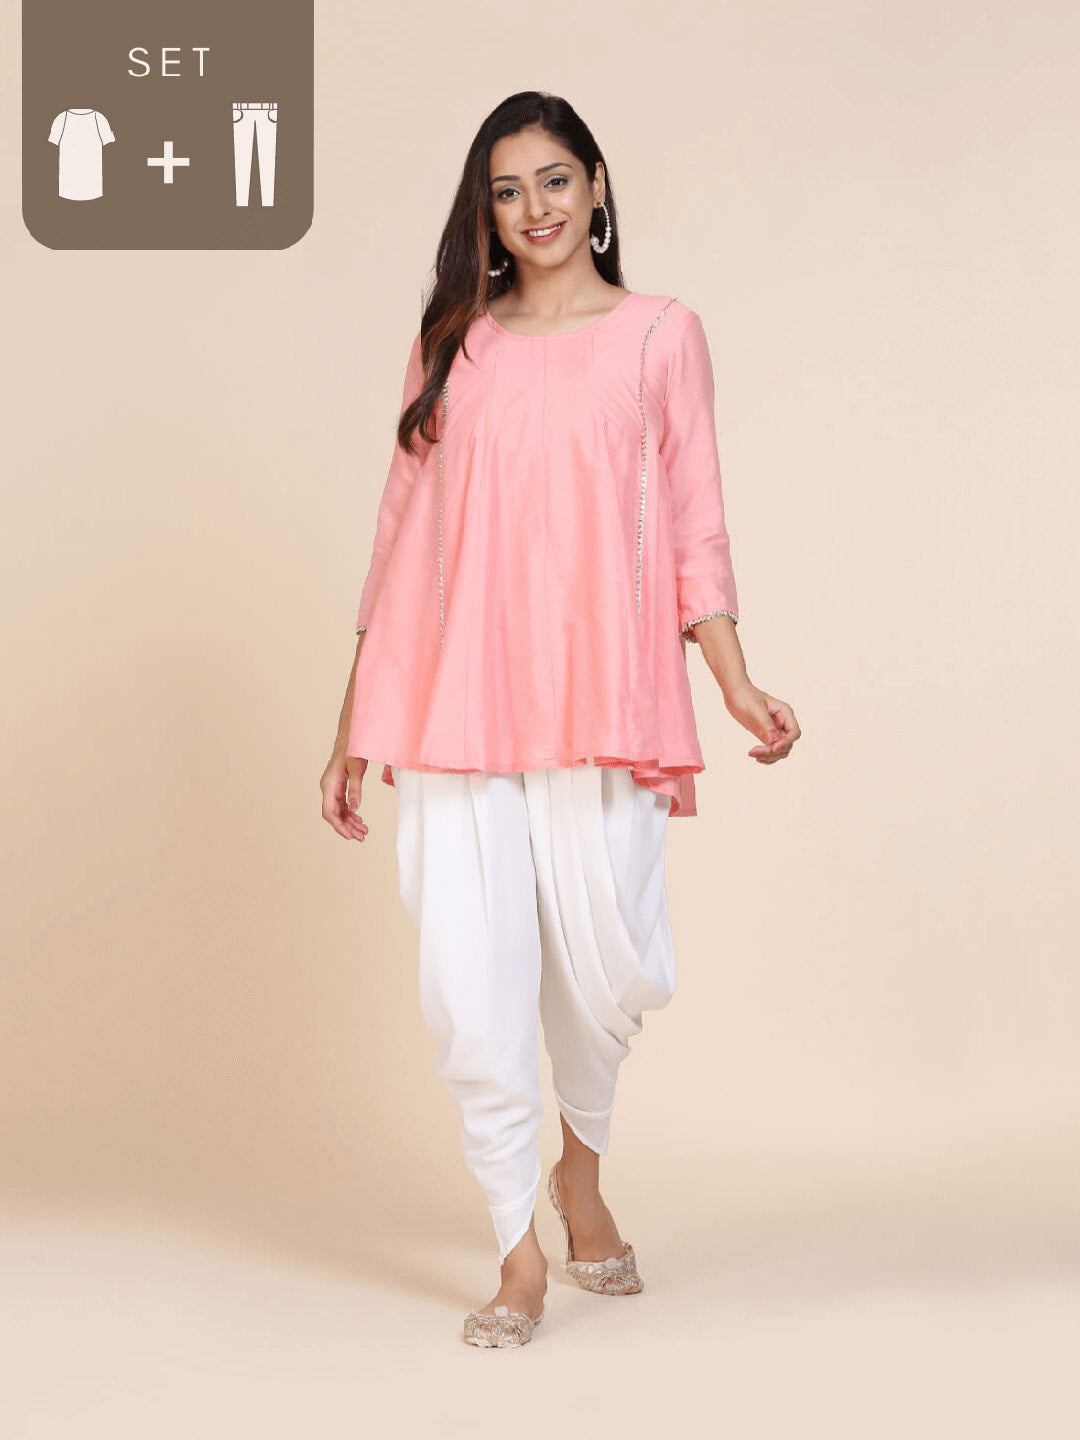 HOW TO STYLE A LOOSE KURTI WITH DHOTI PANTS